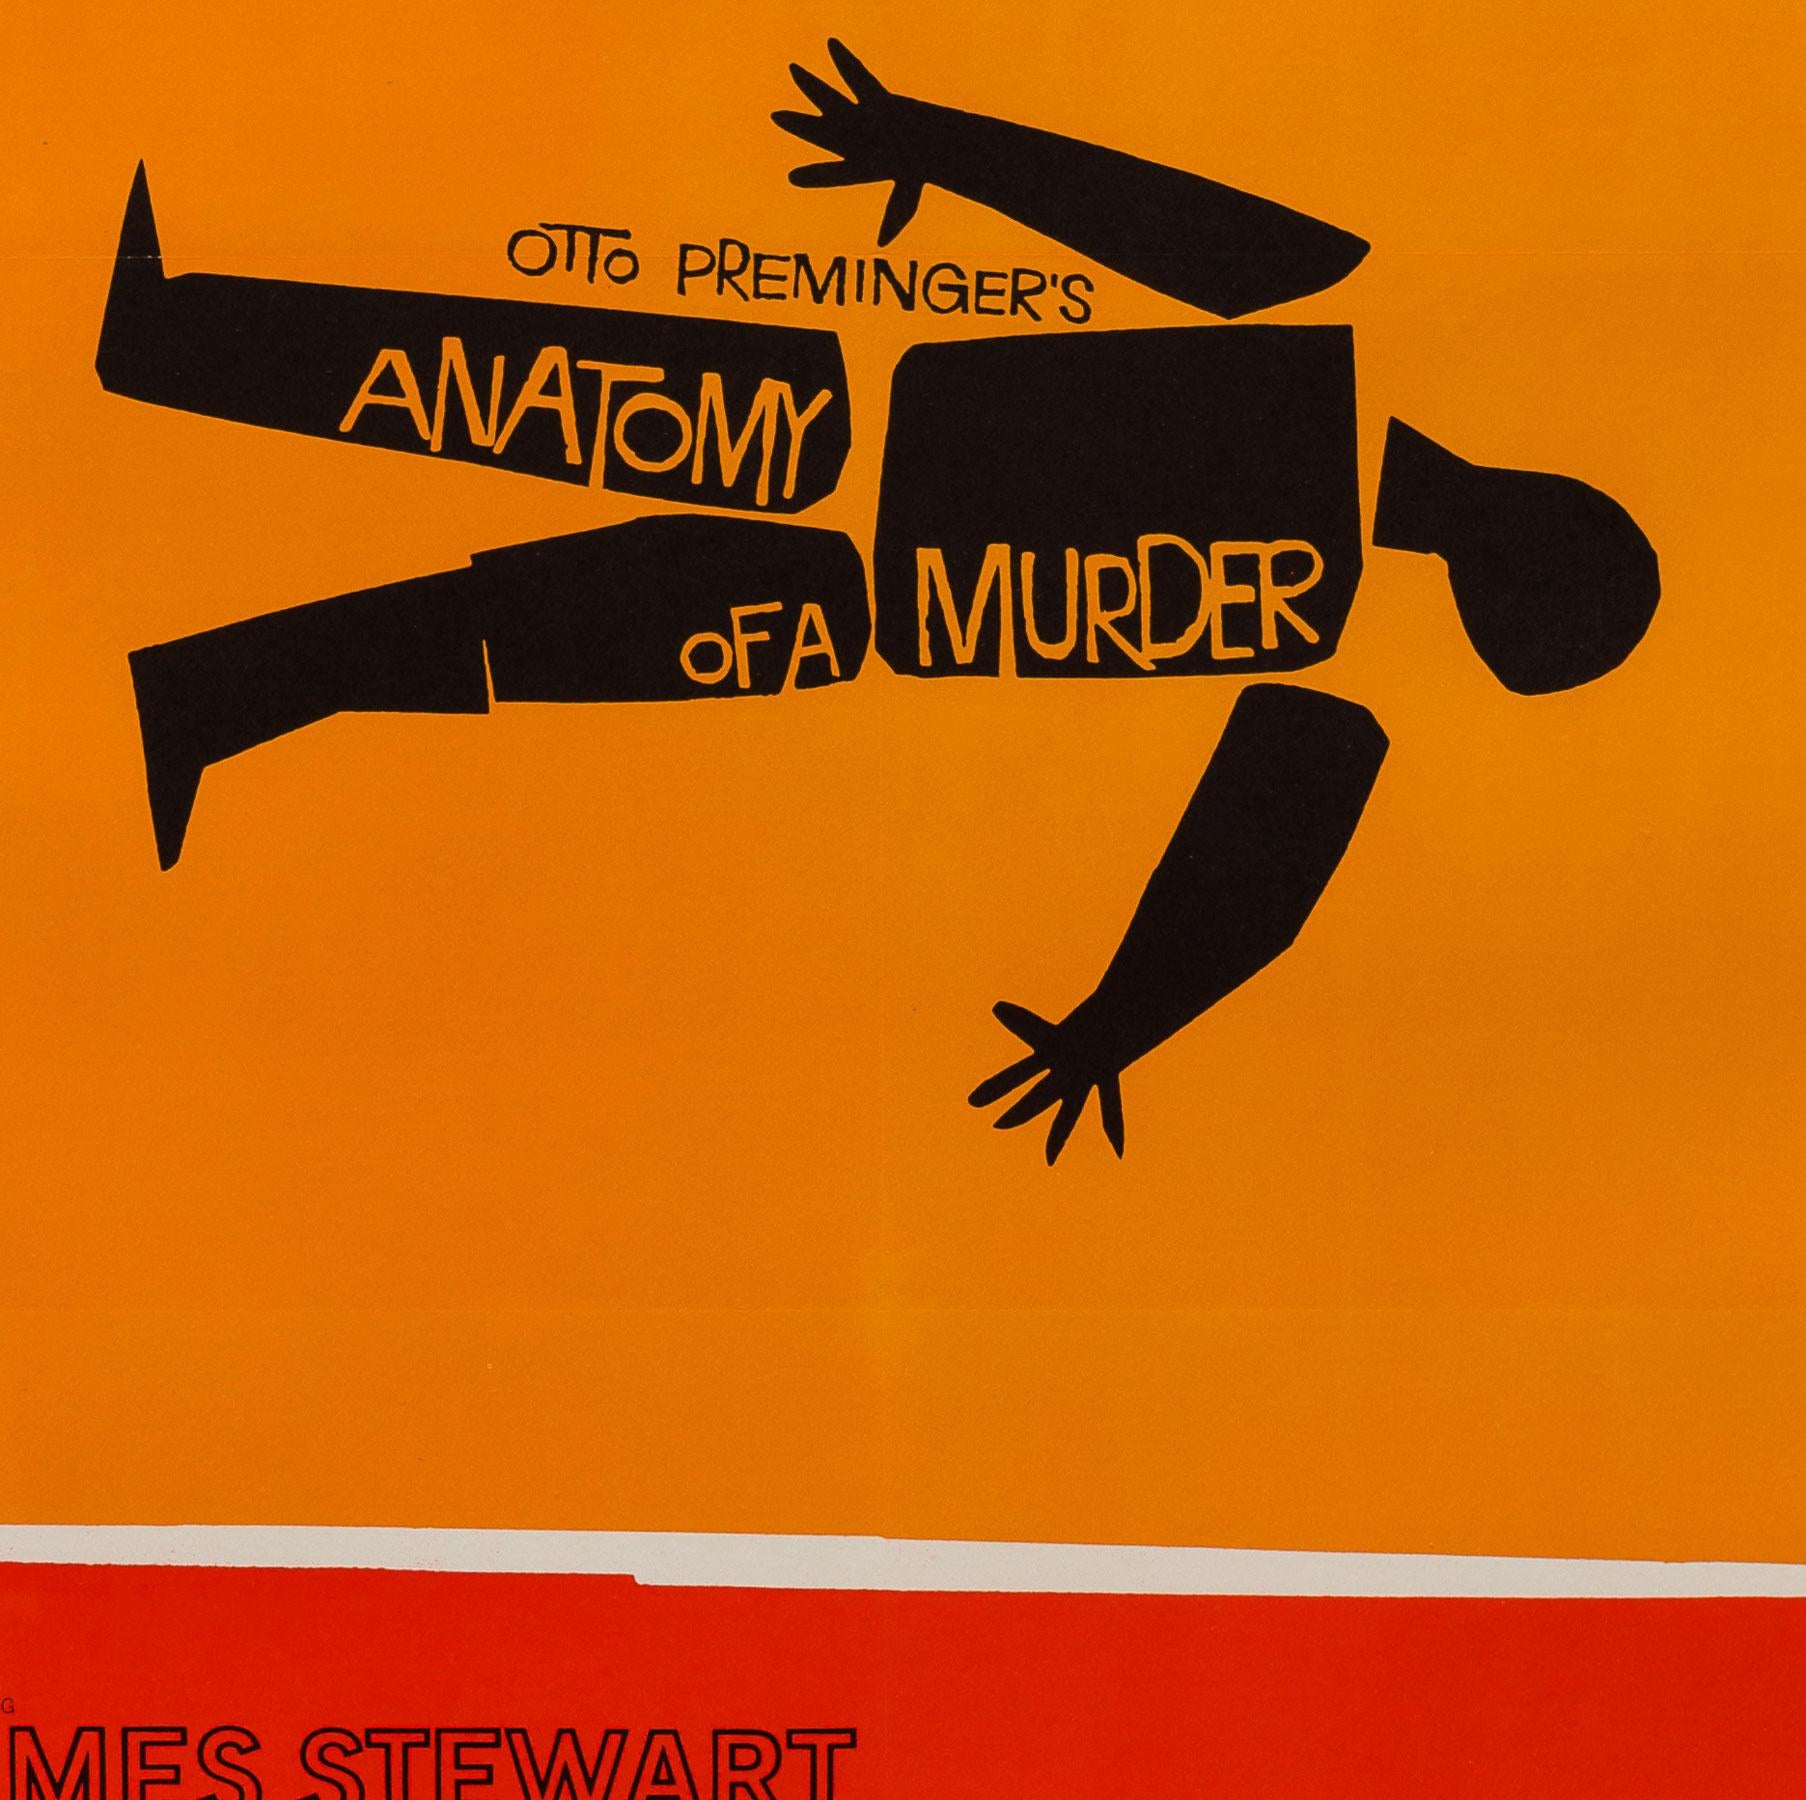 Original US film poster designed by Saul Bass for the 1959 movie Anatomy of a Murder. 

Considered to be one of Bass' finest designs, alongside Vertigo, the Anatomy of a Murder poster with its timeless red, orange and black graphics is a must for